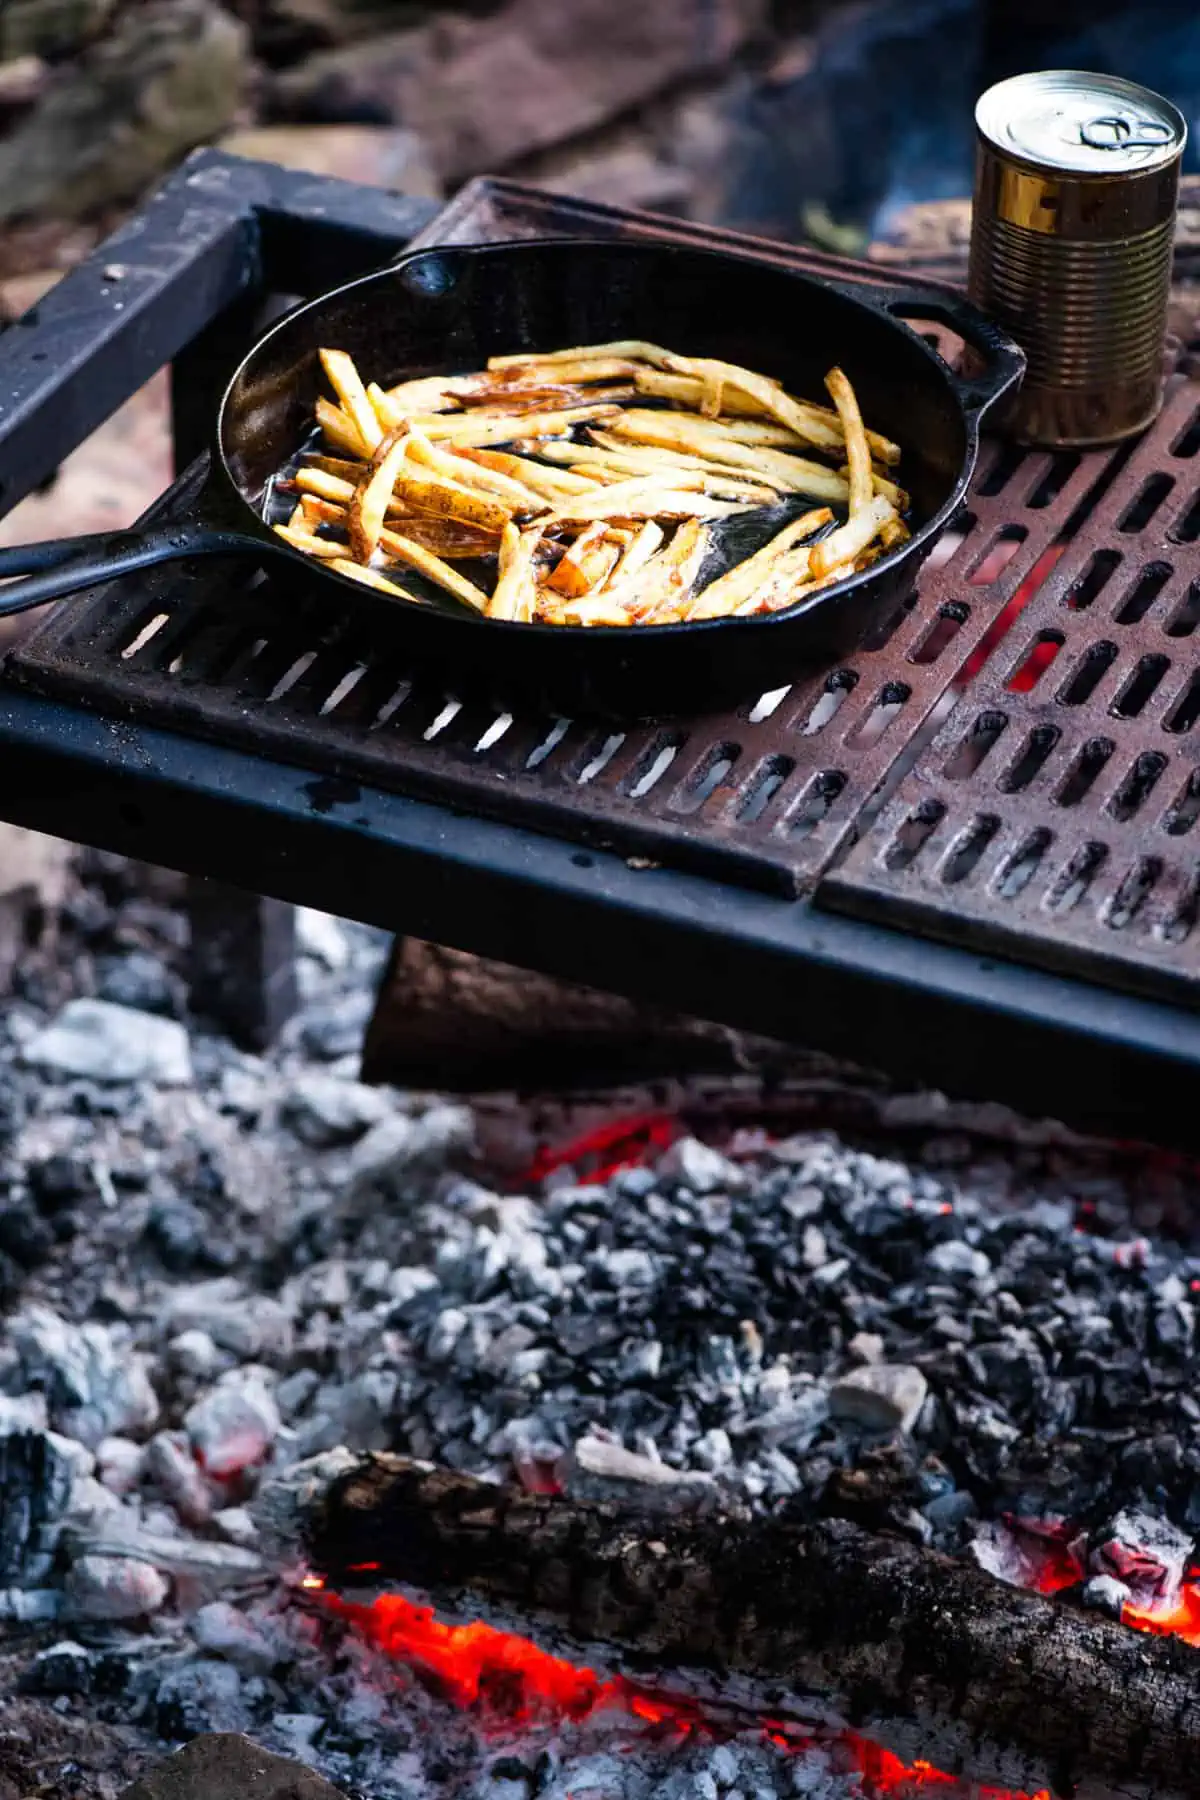 crispy French fries cooking in a cast iron skillet on a campfire grill over a bed of hot coals